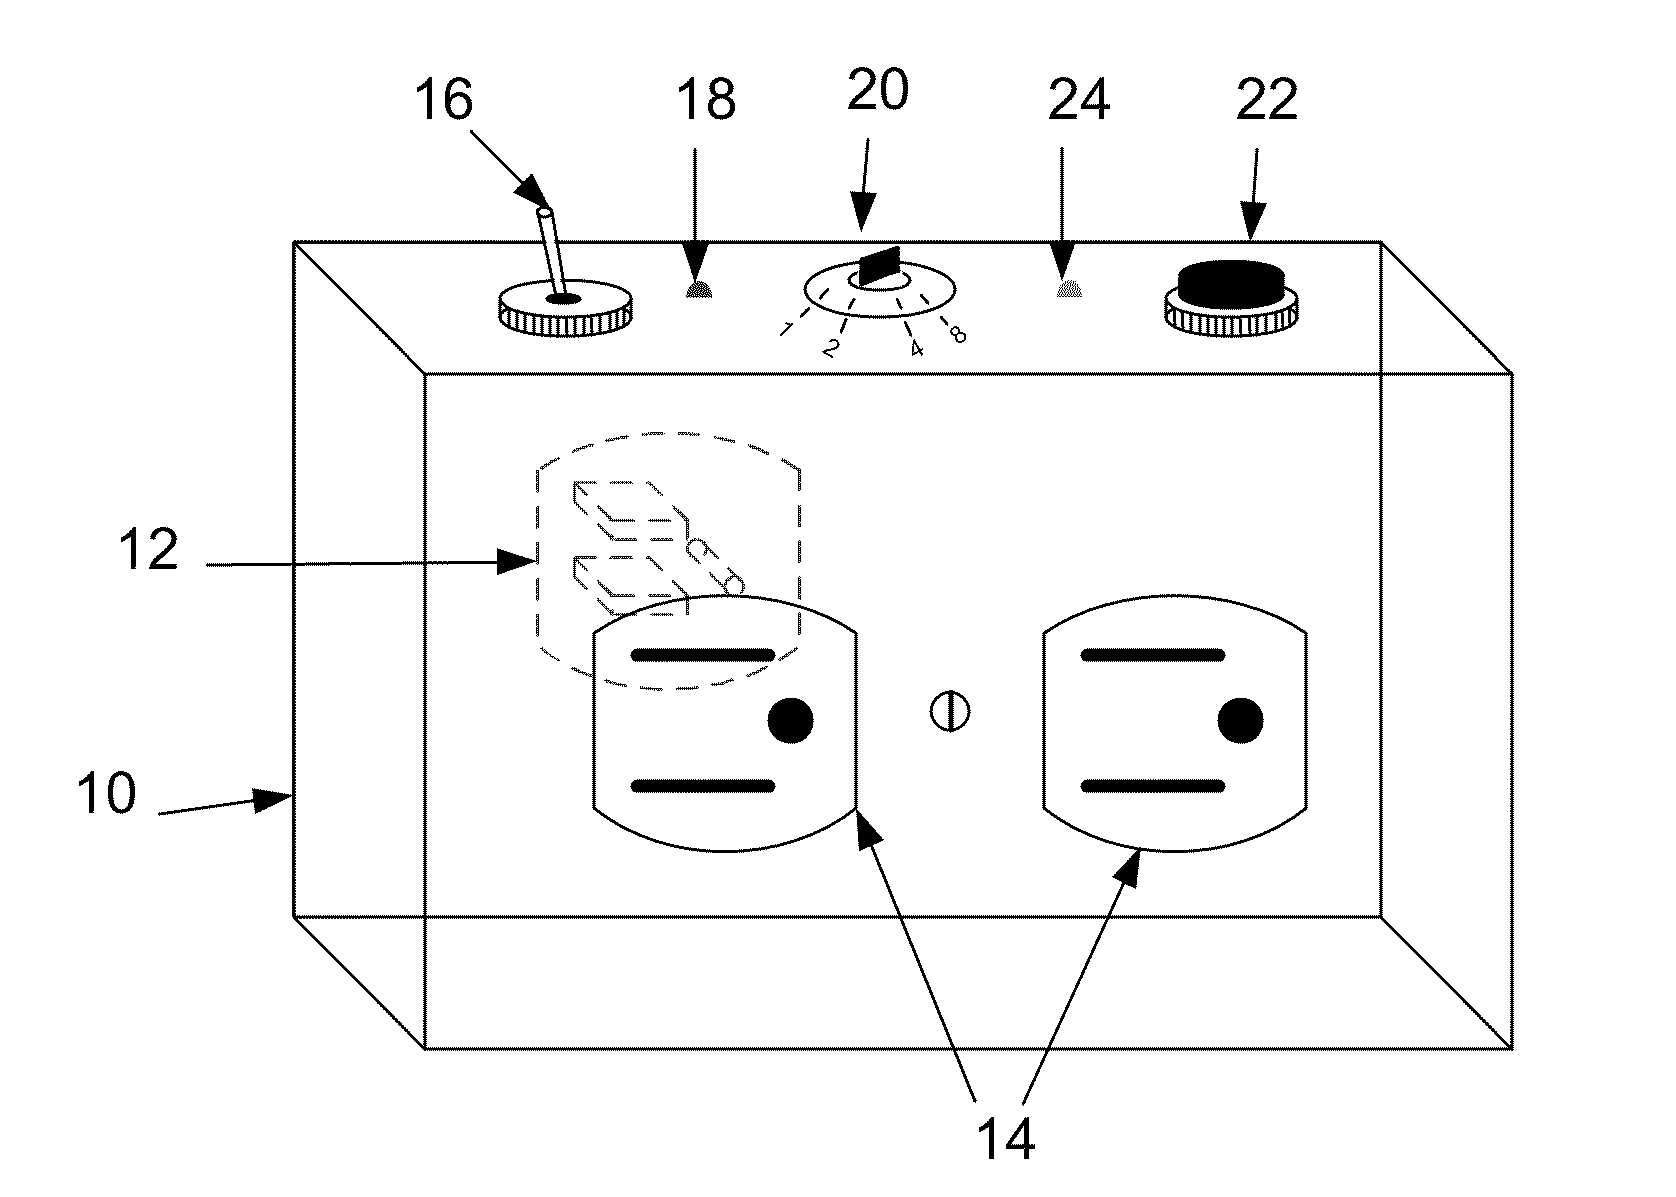 Electrical timer apparatus and a system for disconnecting electrical power